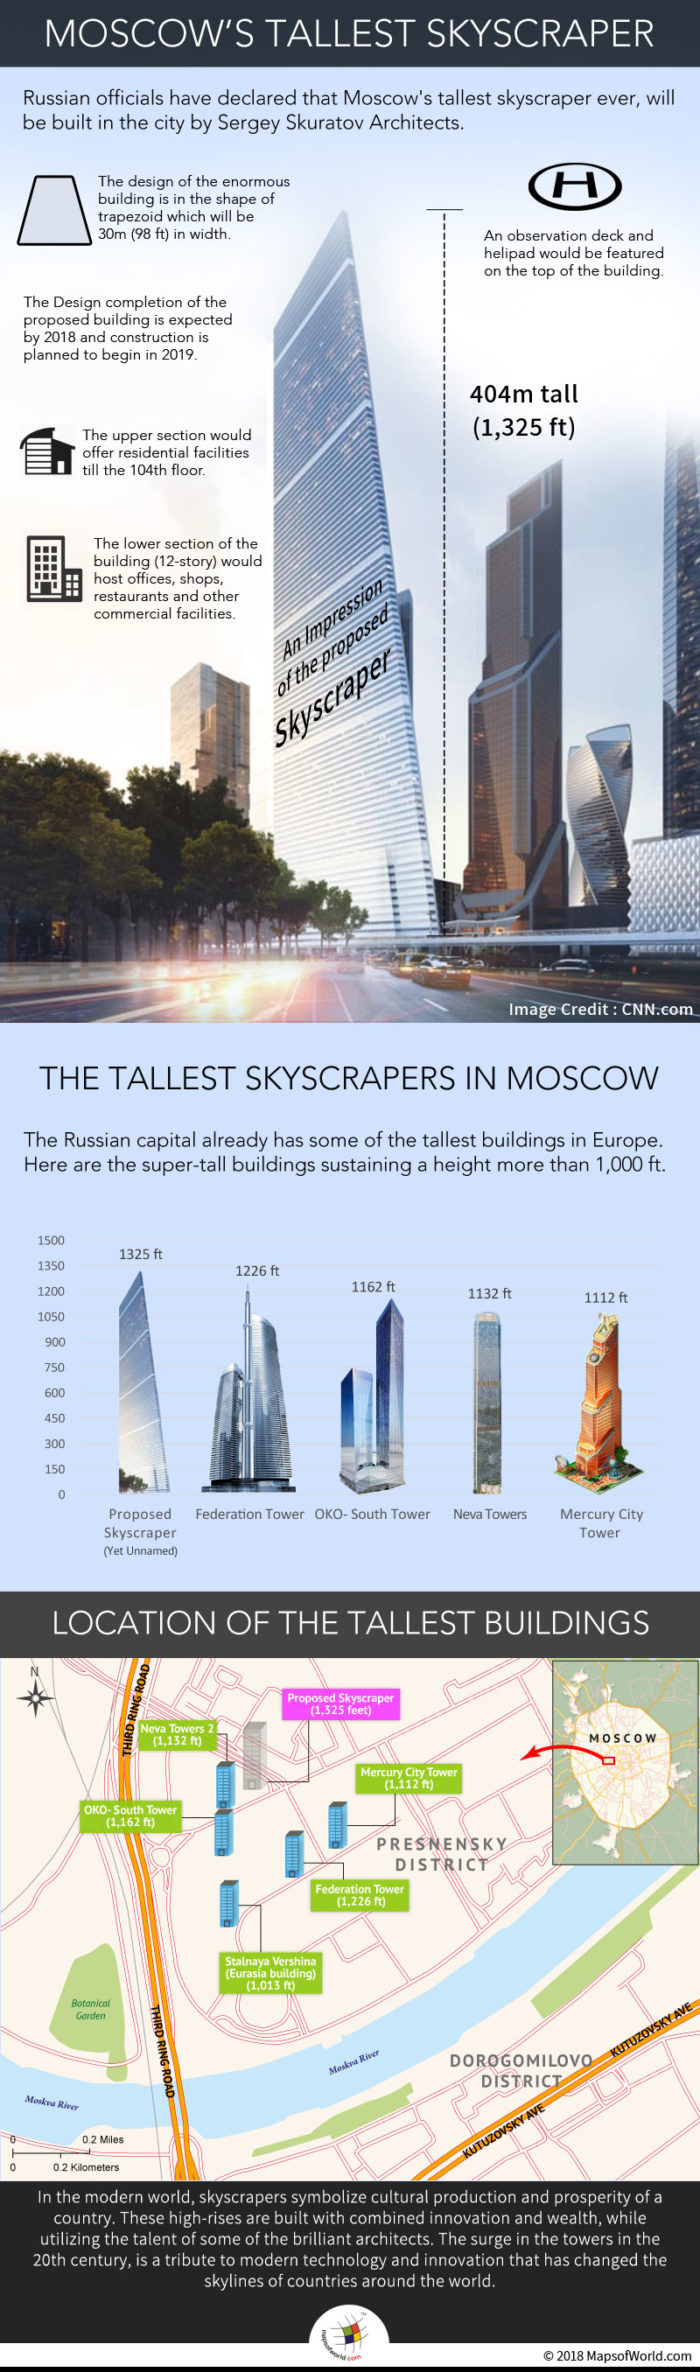 Infographic elaborating the details of Moscow's Tallest Skyscraper to be built